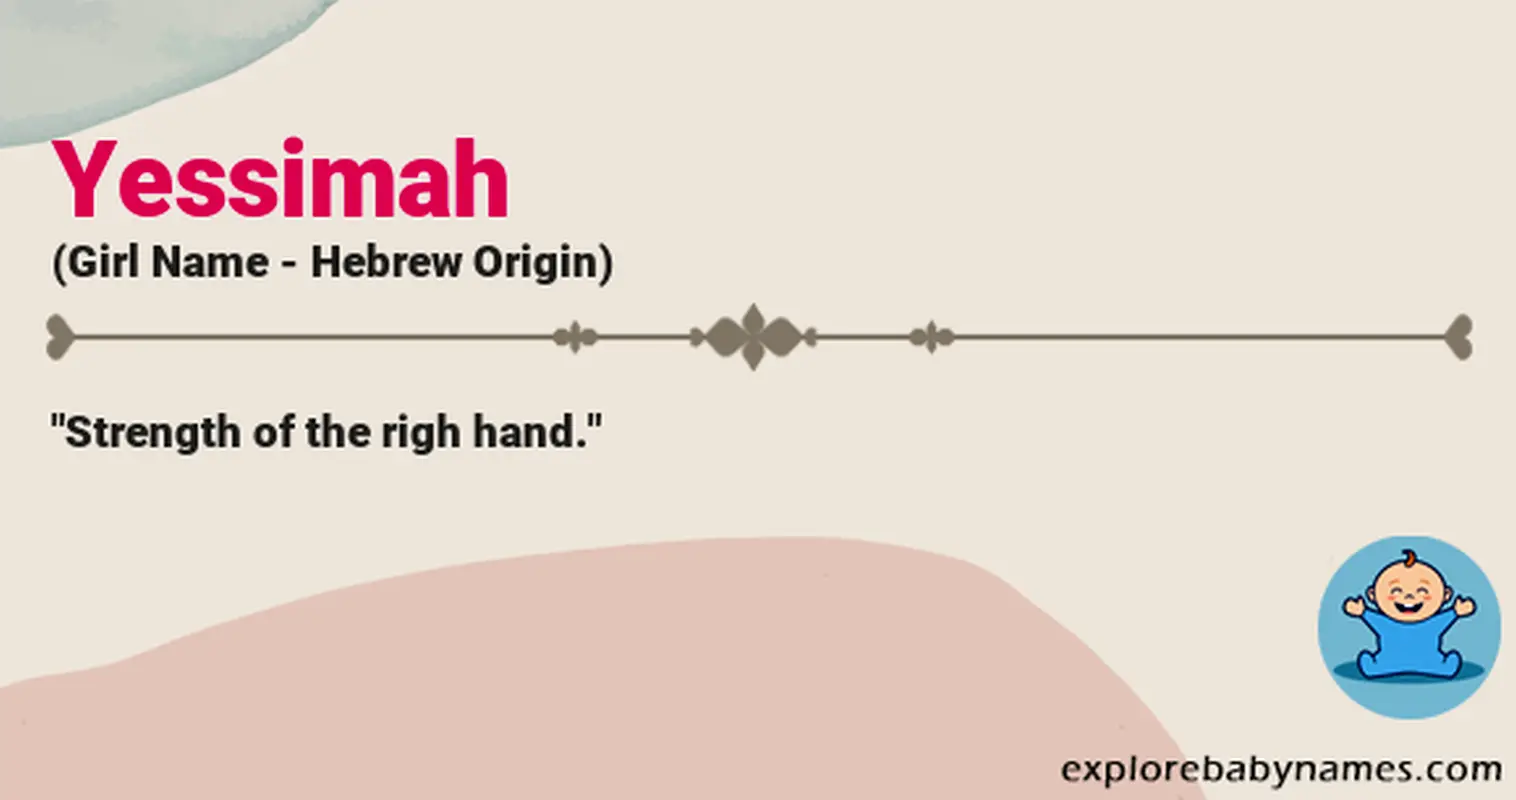 Meaning of Yessimah